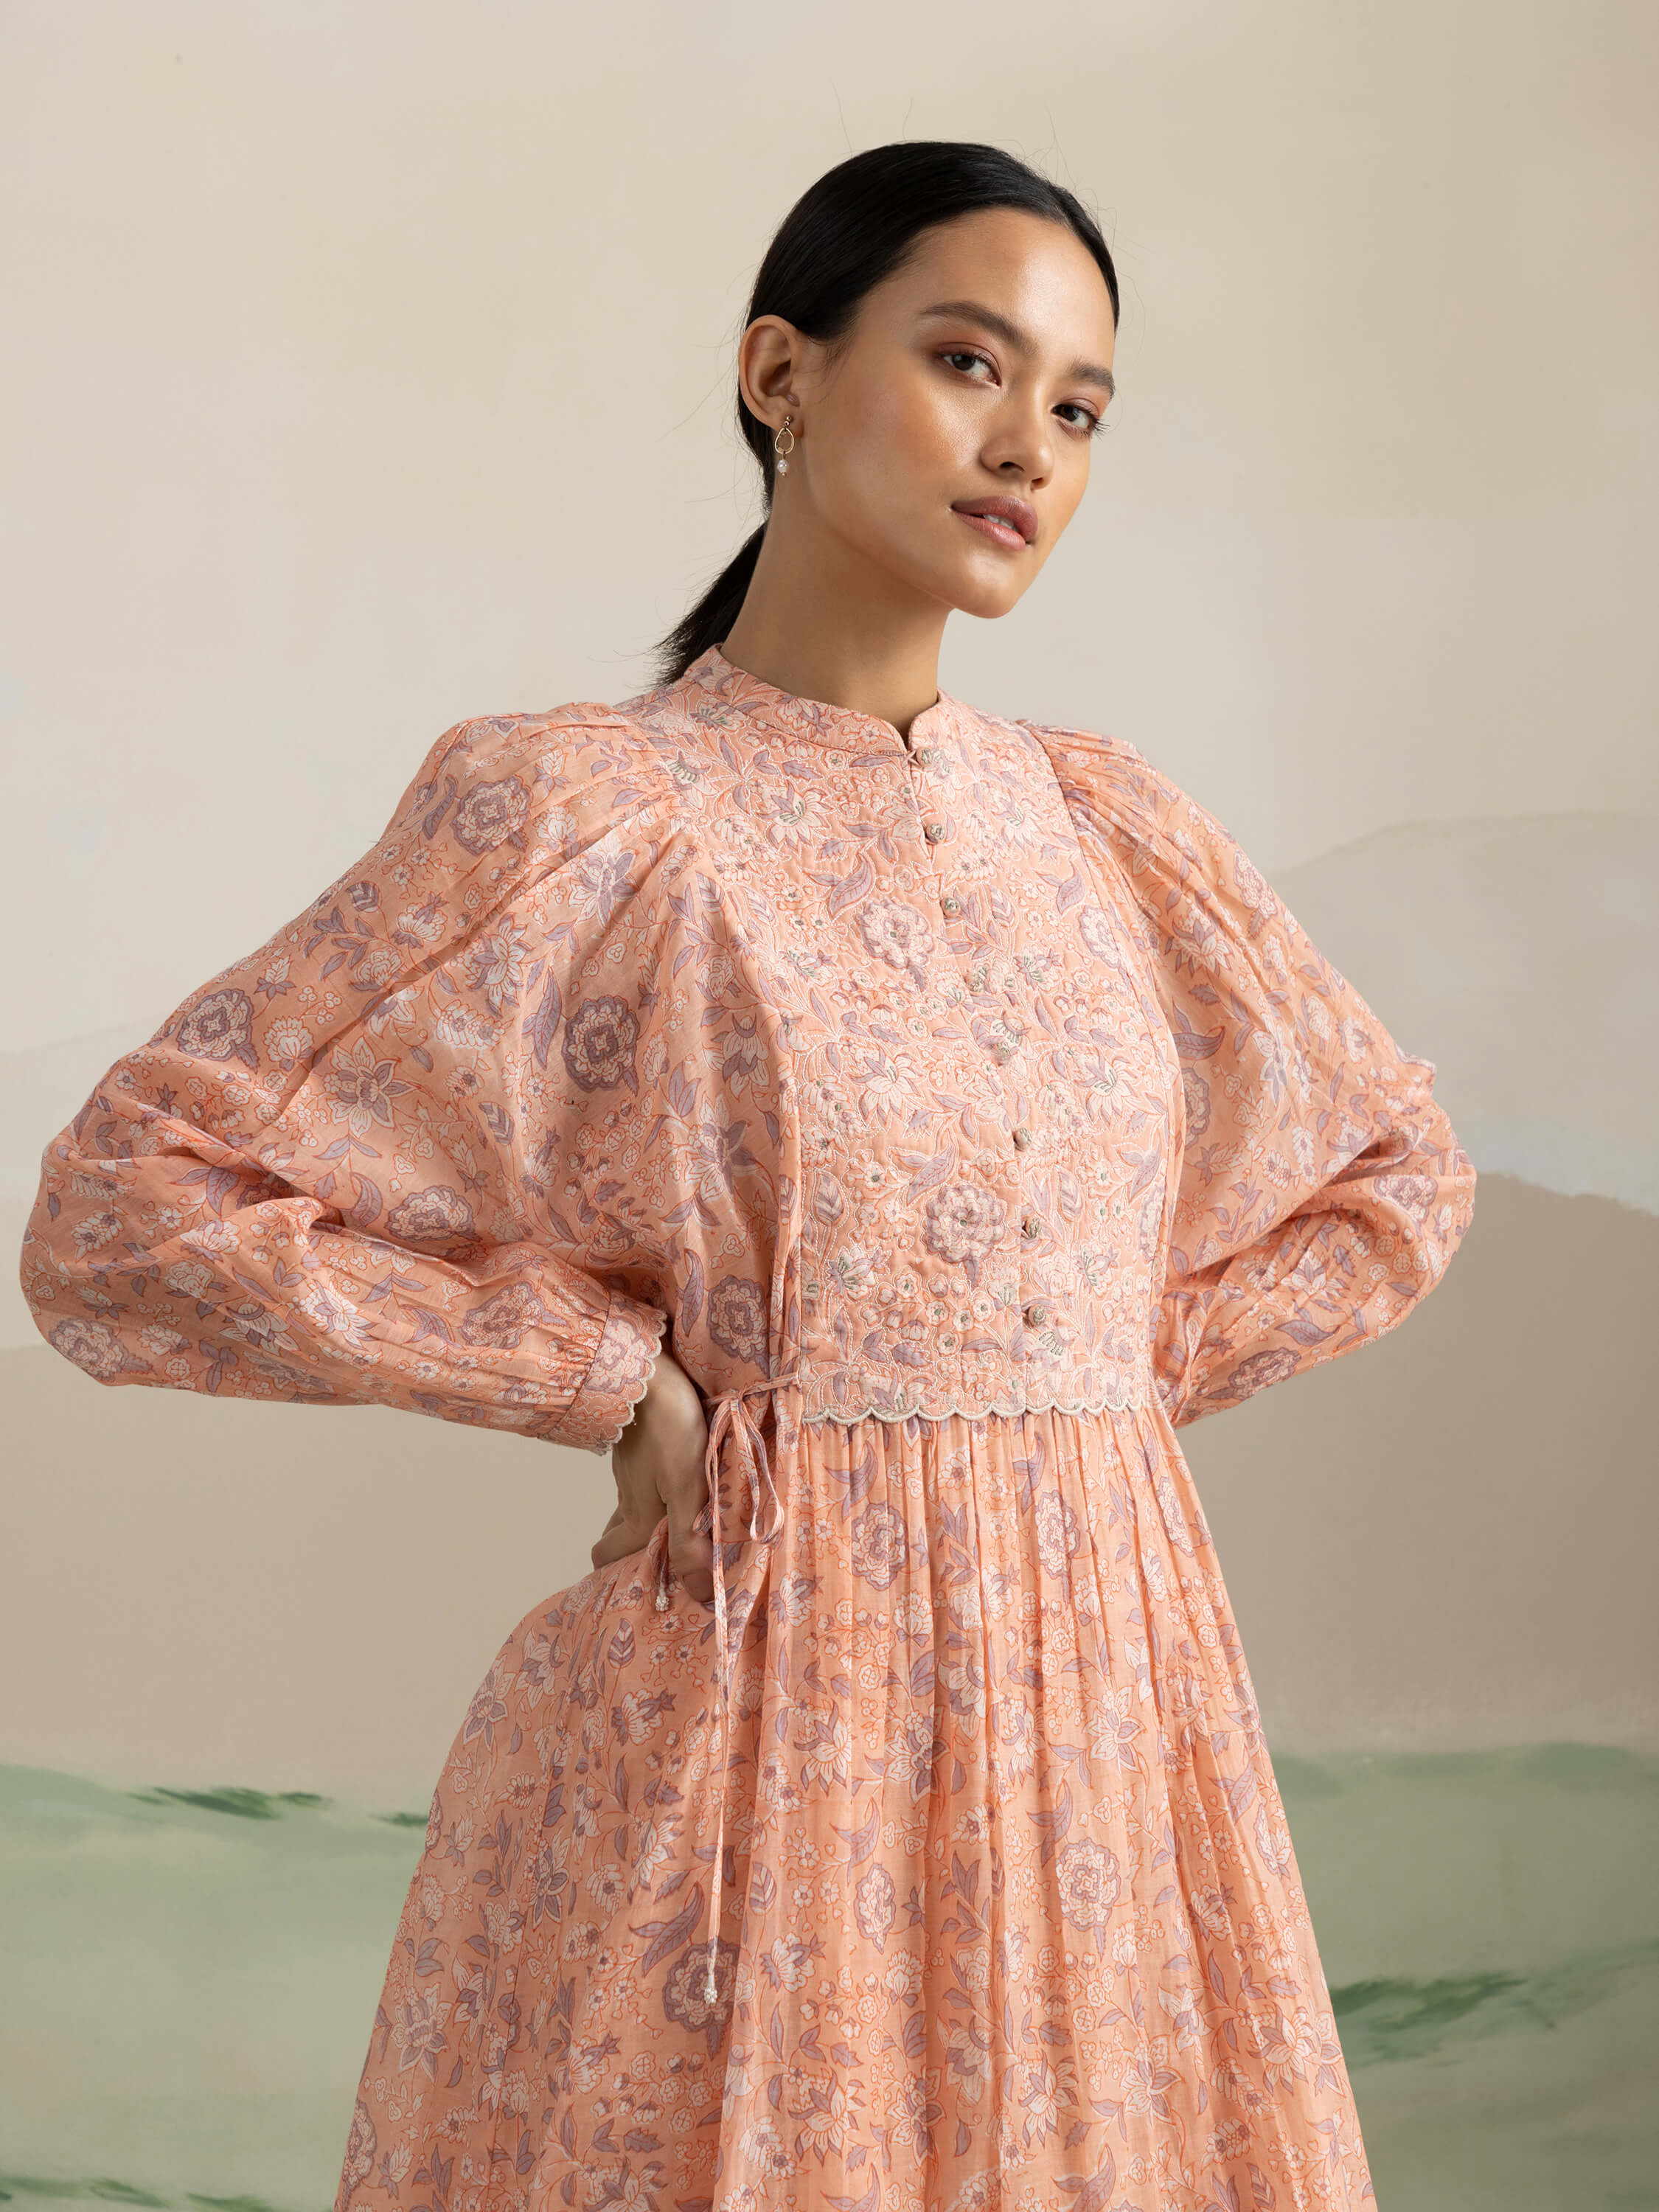 Woman wearing a floral peach long-sleeve dress with intricate details.